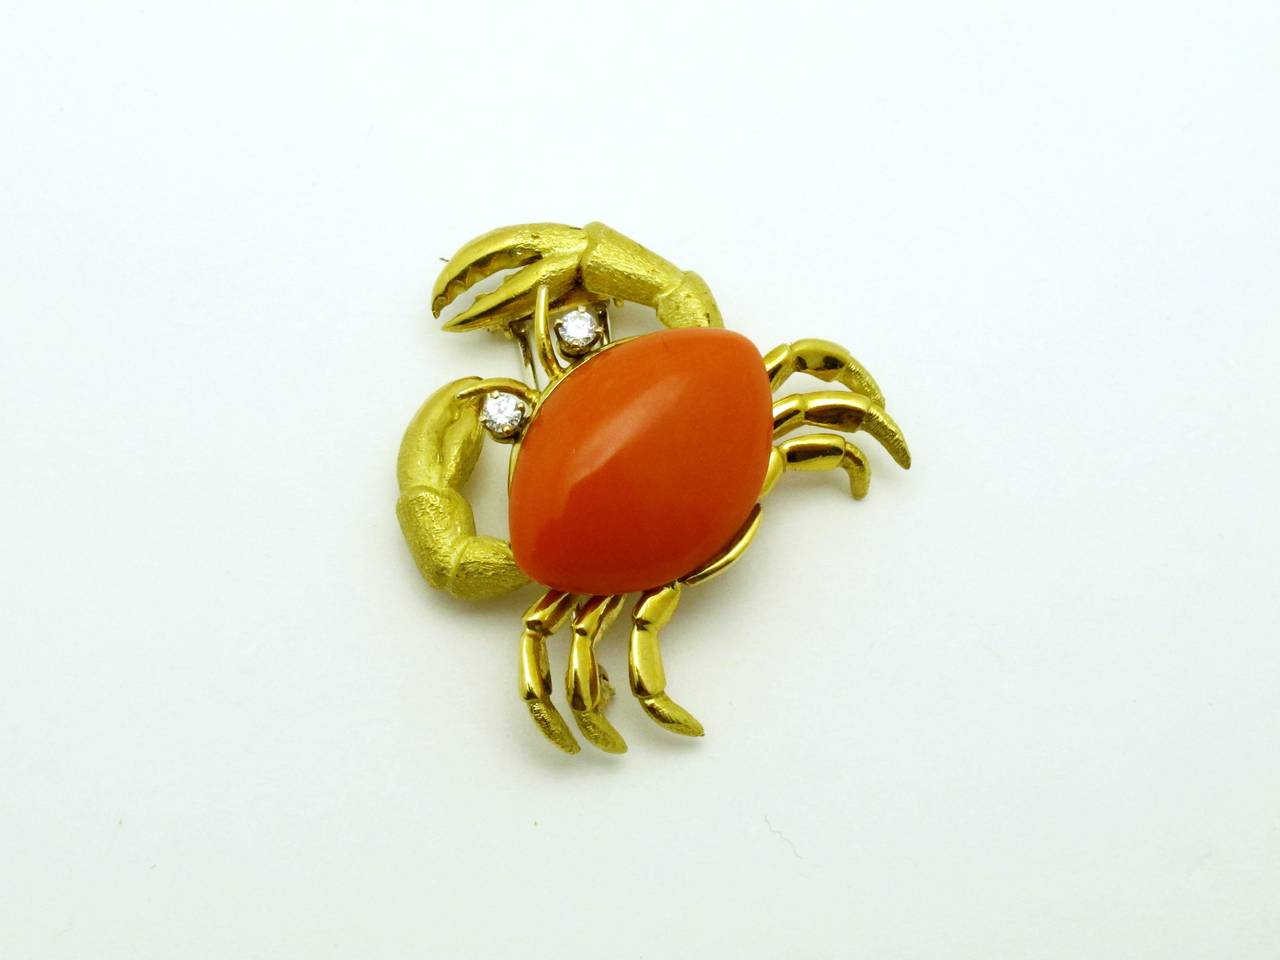 Beautiful modeled yellow gold crab brooch with a polished and Florentine finish.  It is set with orange Mediterranean coral and round brilliant-cut diamond eyes.